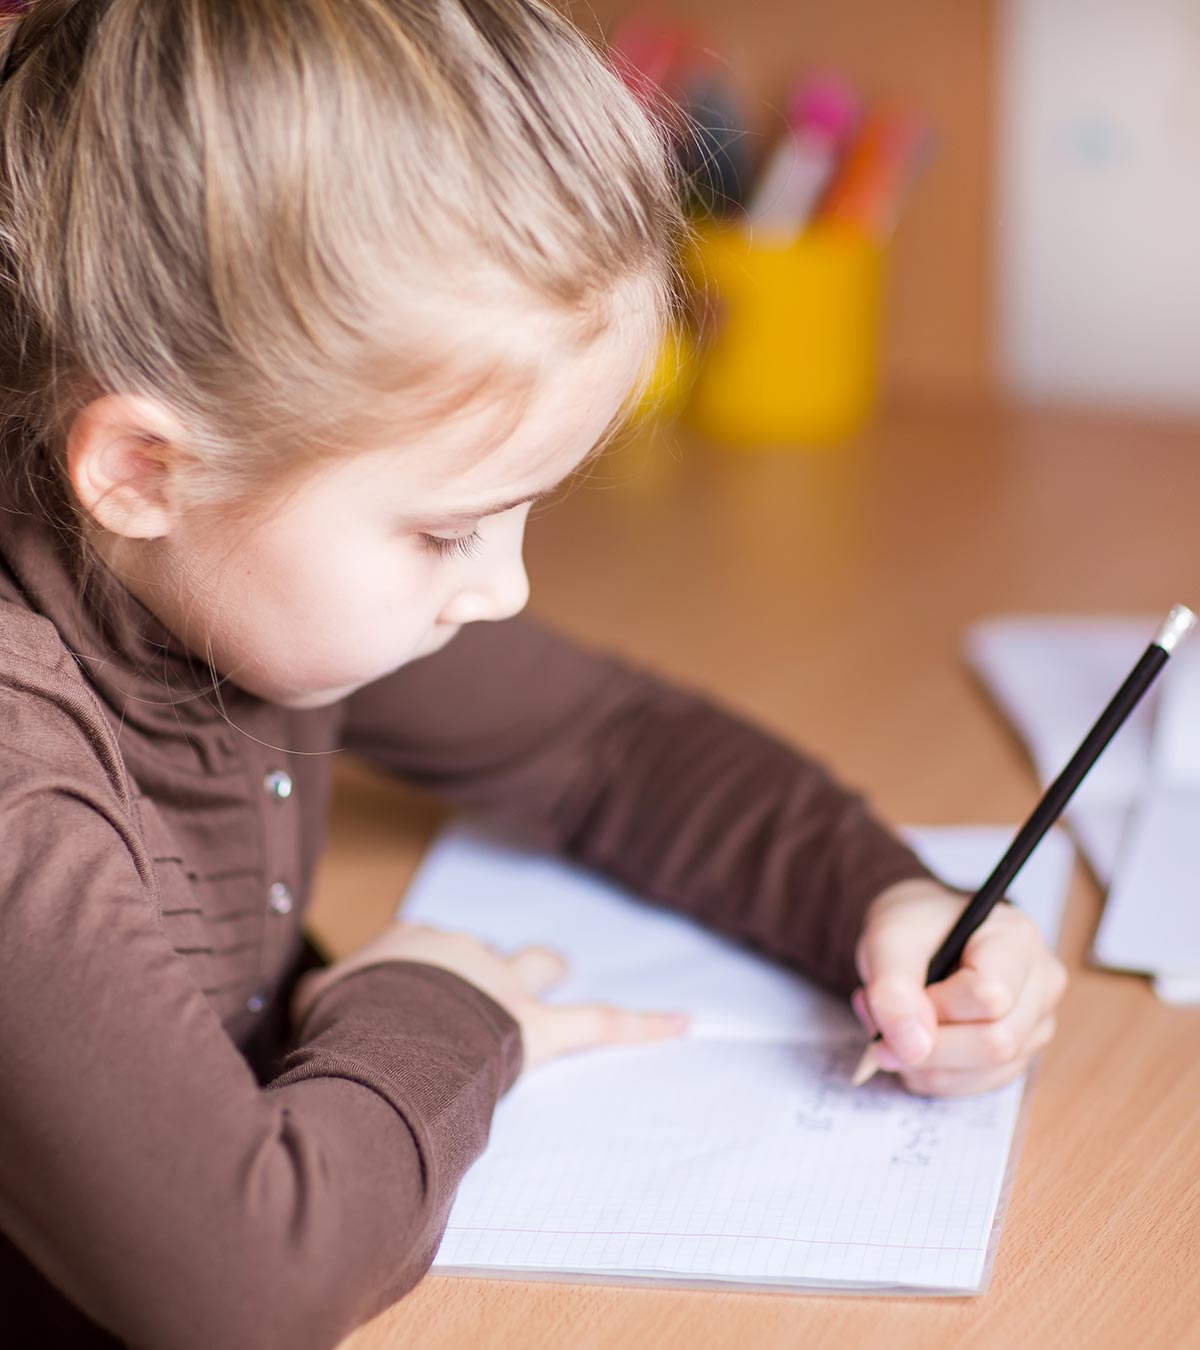 How To Teach And Help Your Left-Handed Child To Write?